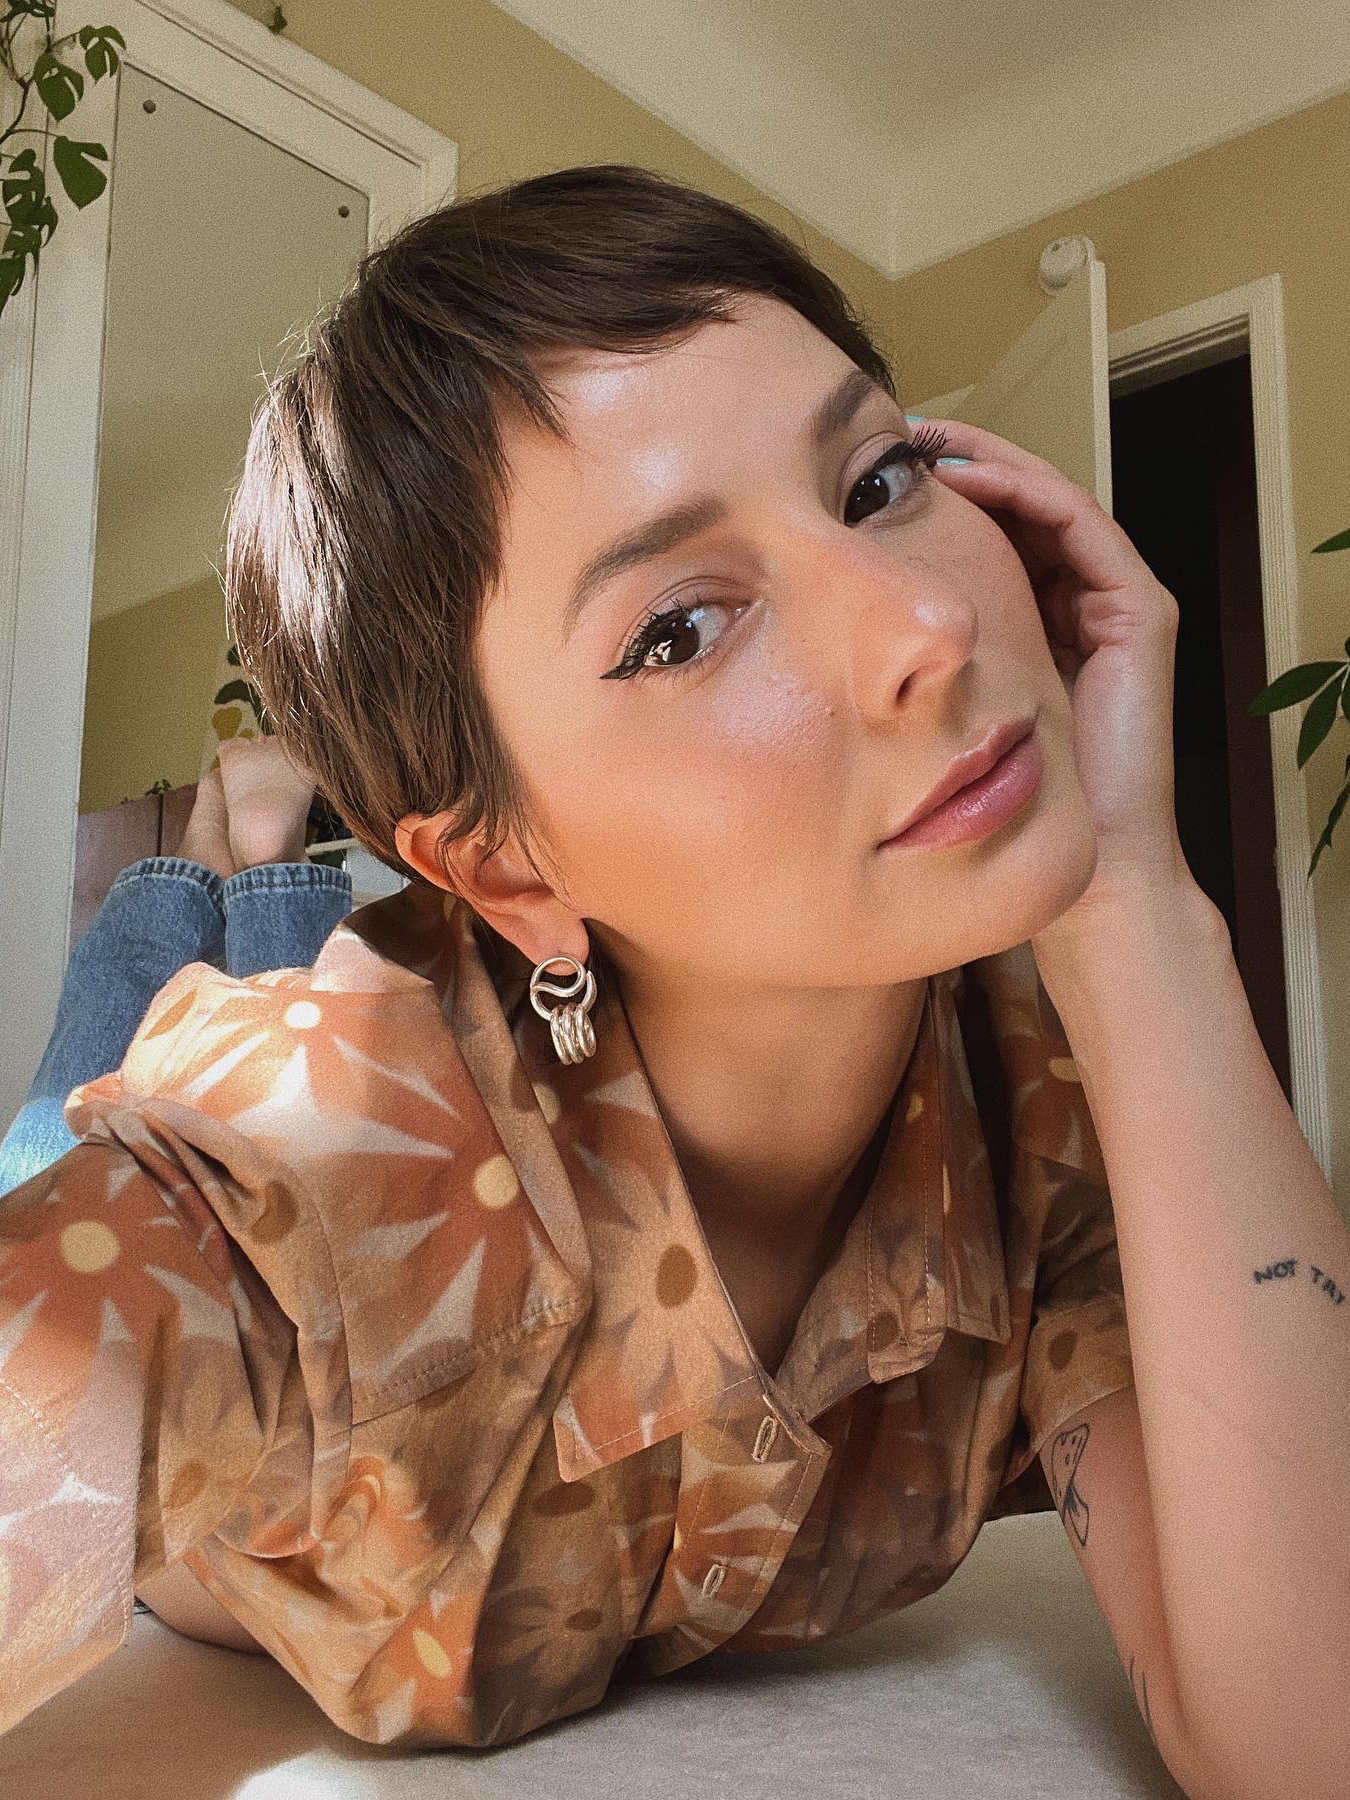 These Short-Hair Trends Are About to Be All Over Your Instagram Feed